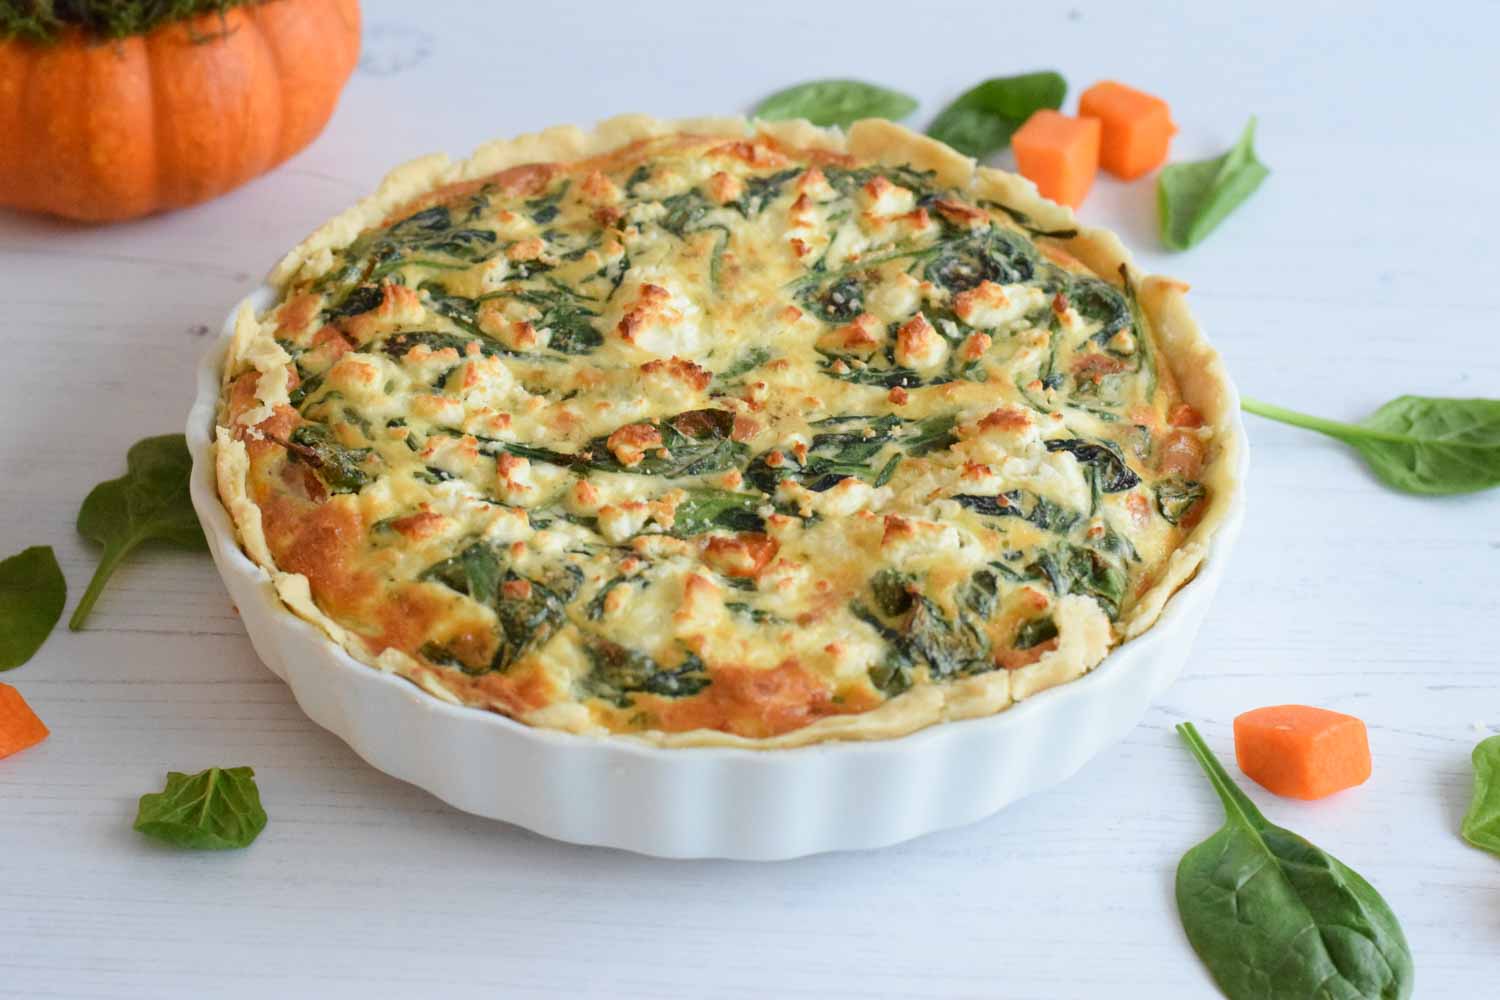 Low FODMAP pumpkin quiche with spinach and feta